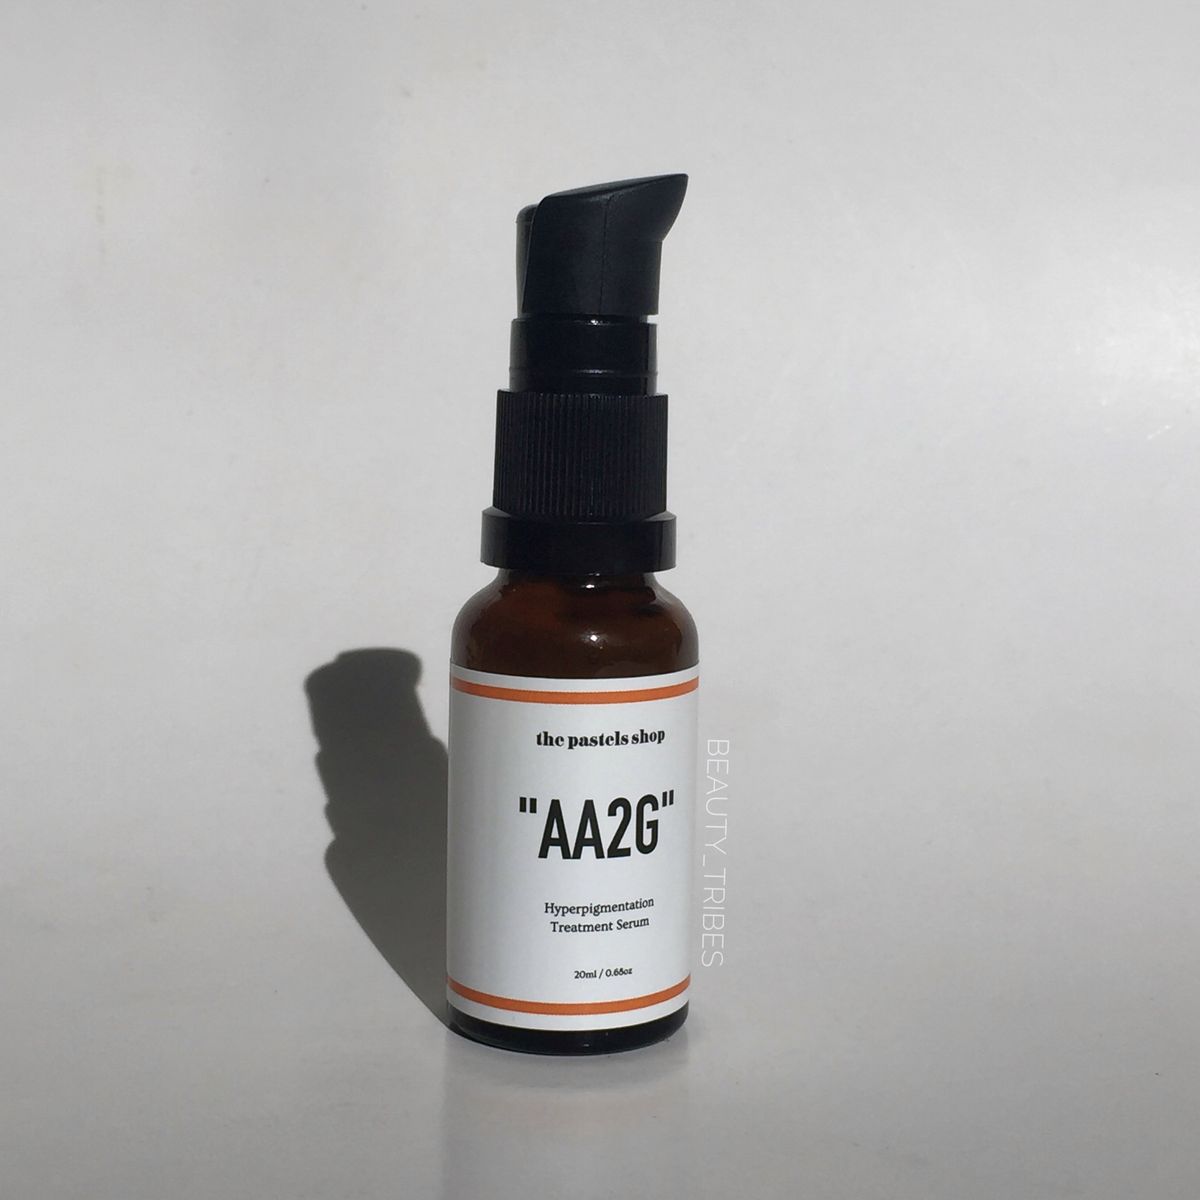 THE PASTELS SHOP AA2G Hyperpigmentation Treatment Serum Review by Beauty_tribes